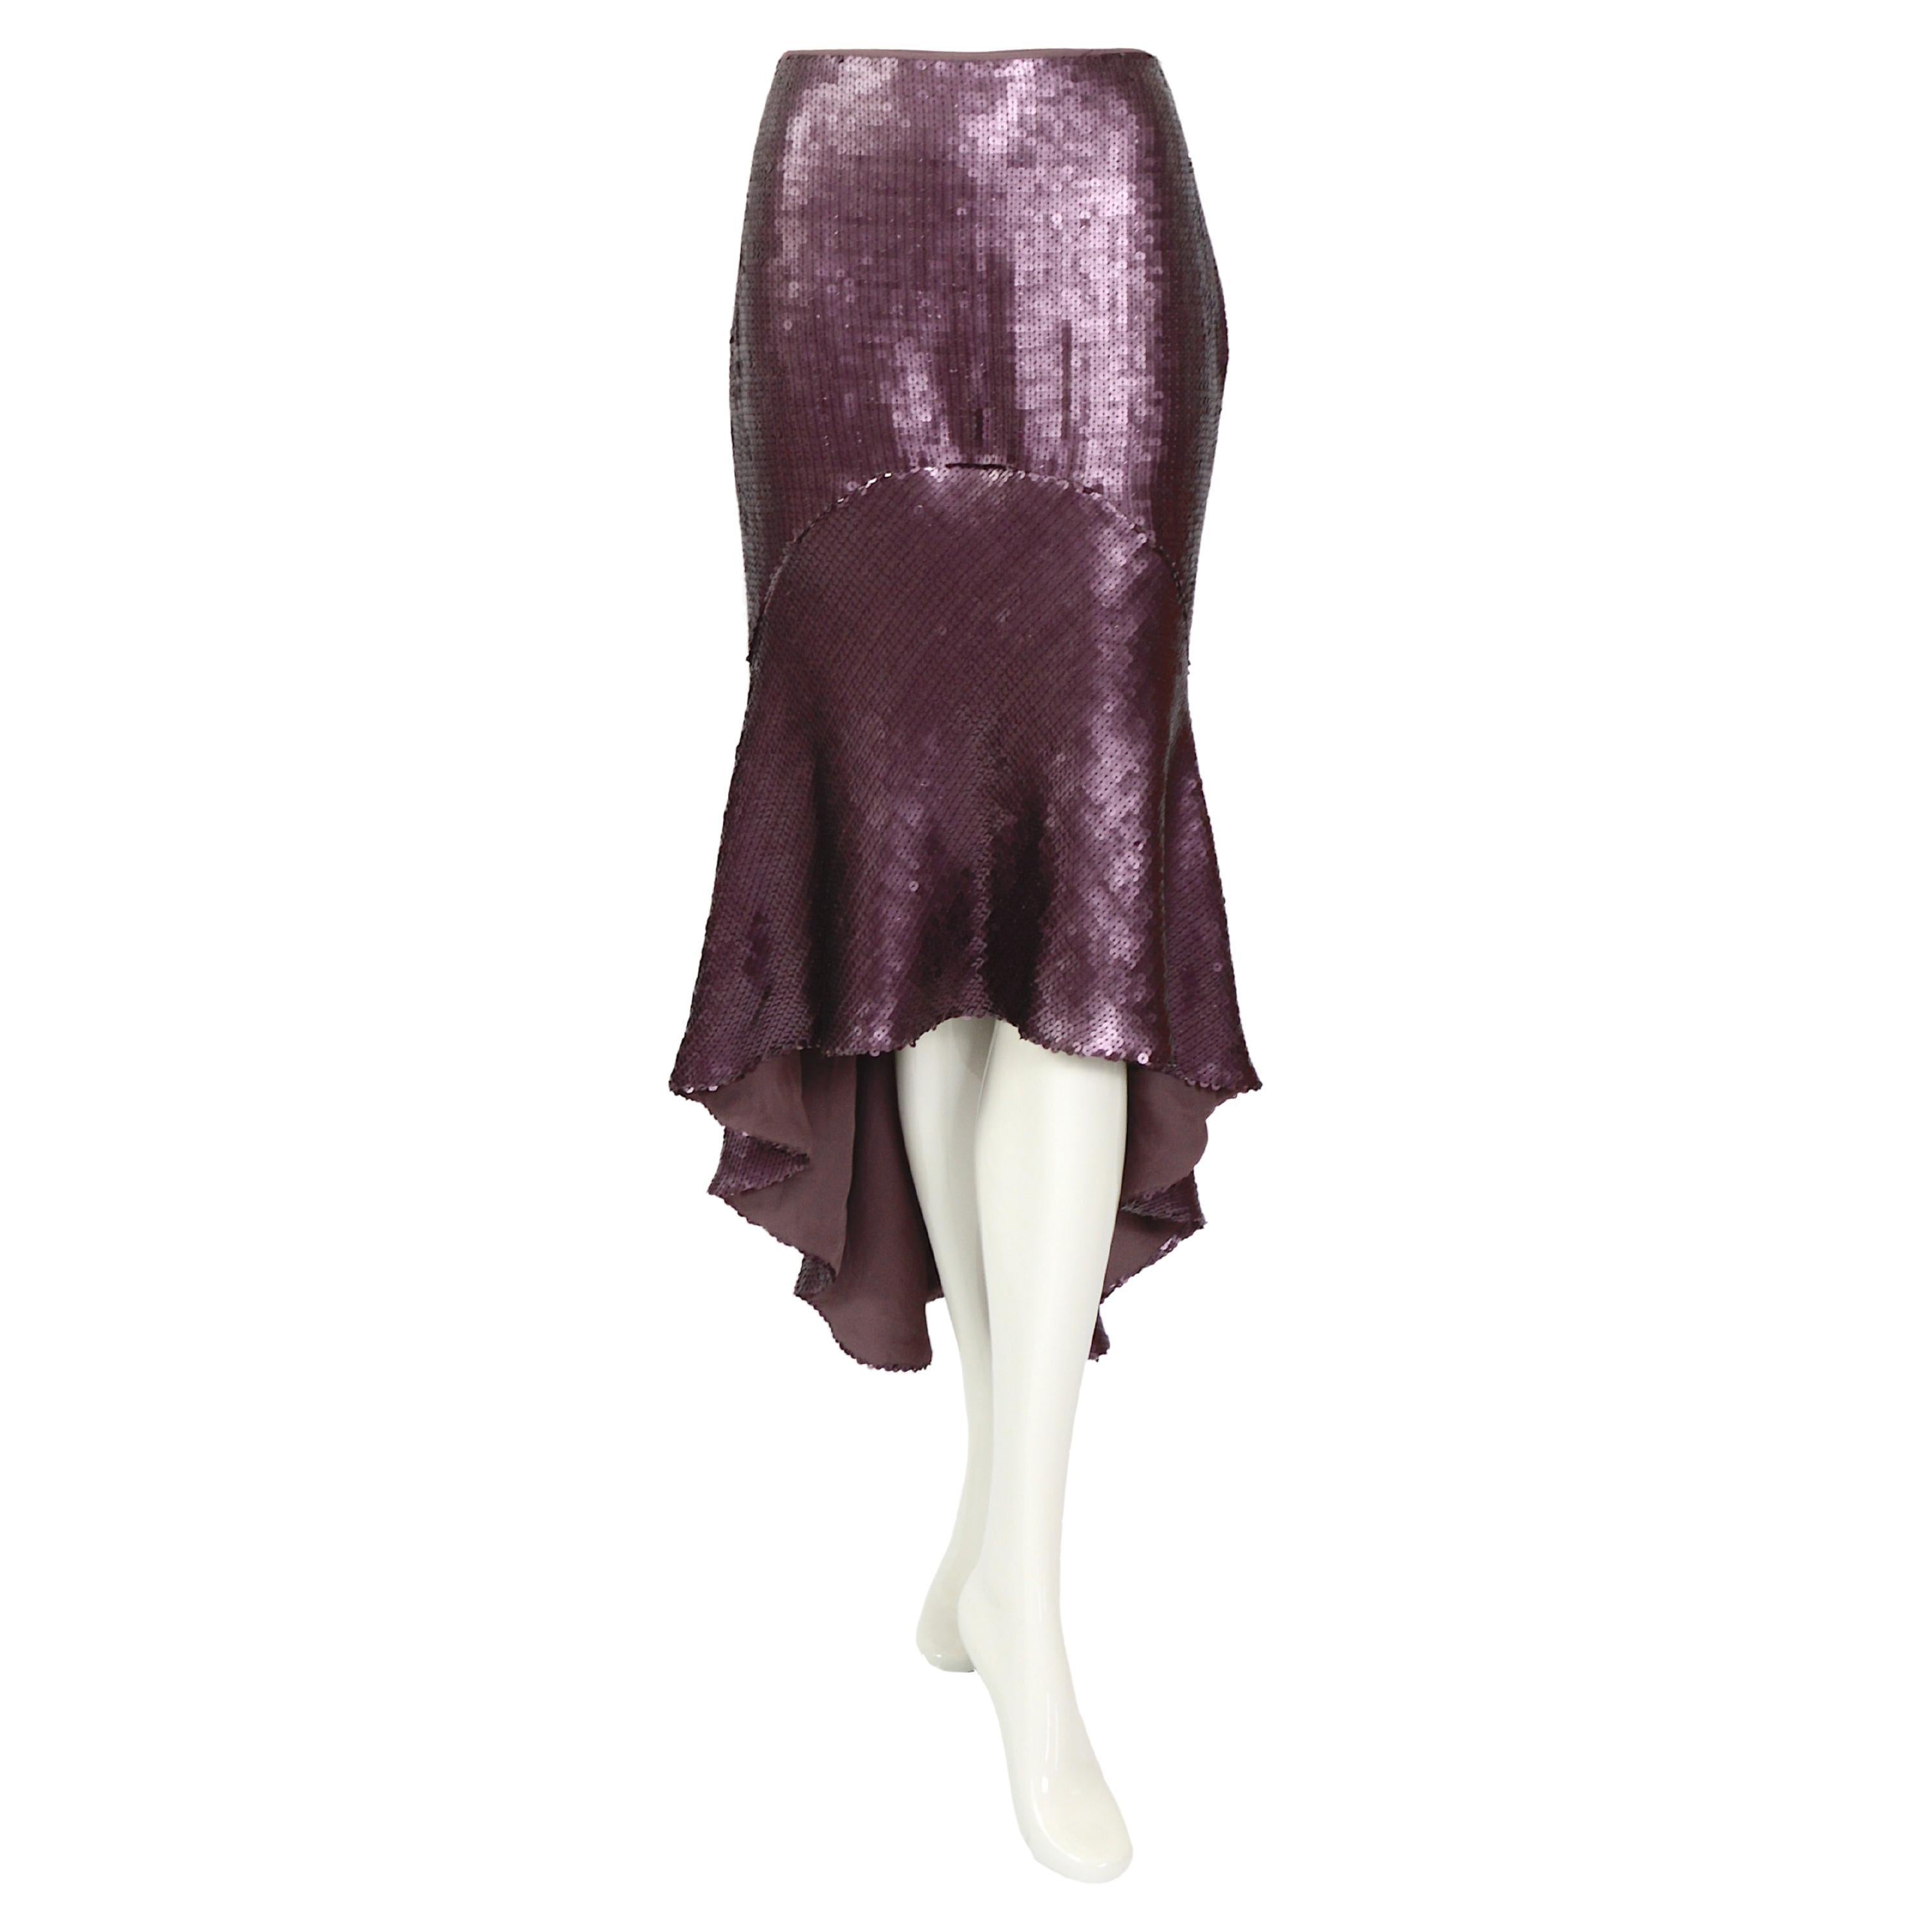 Chloé by Stella McCartney runway 1999 vintage sequin fishtail style skirt  For Sale